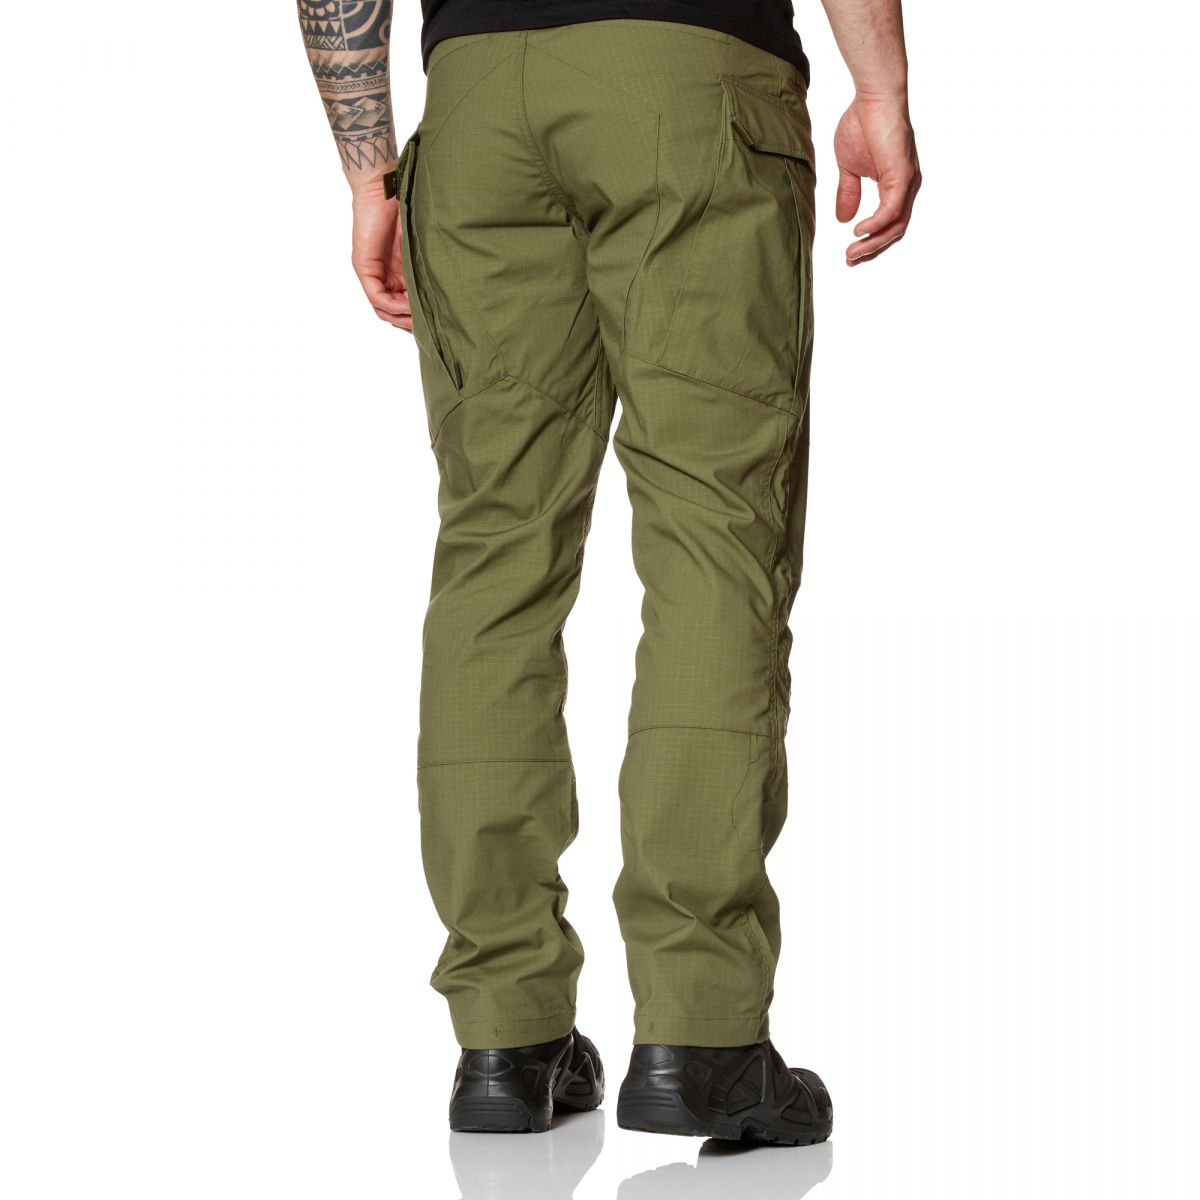 Purchase the Helikon-Tex SFU Next Pants MK2 olive green by ASMC